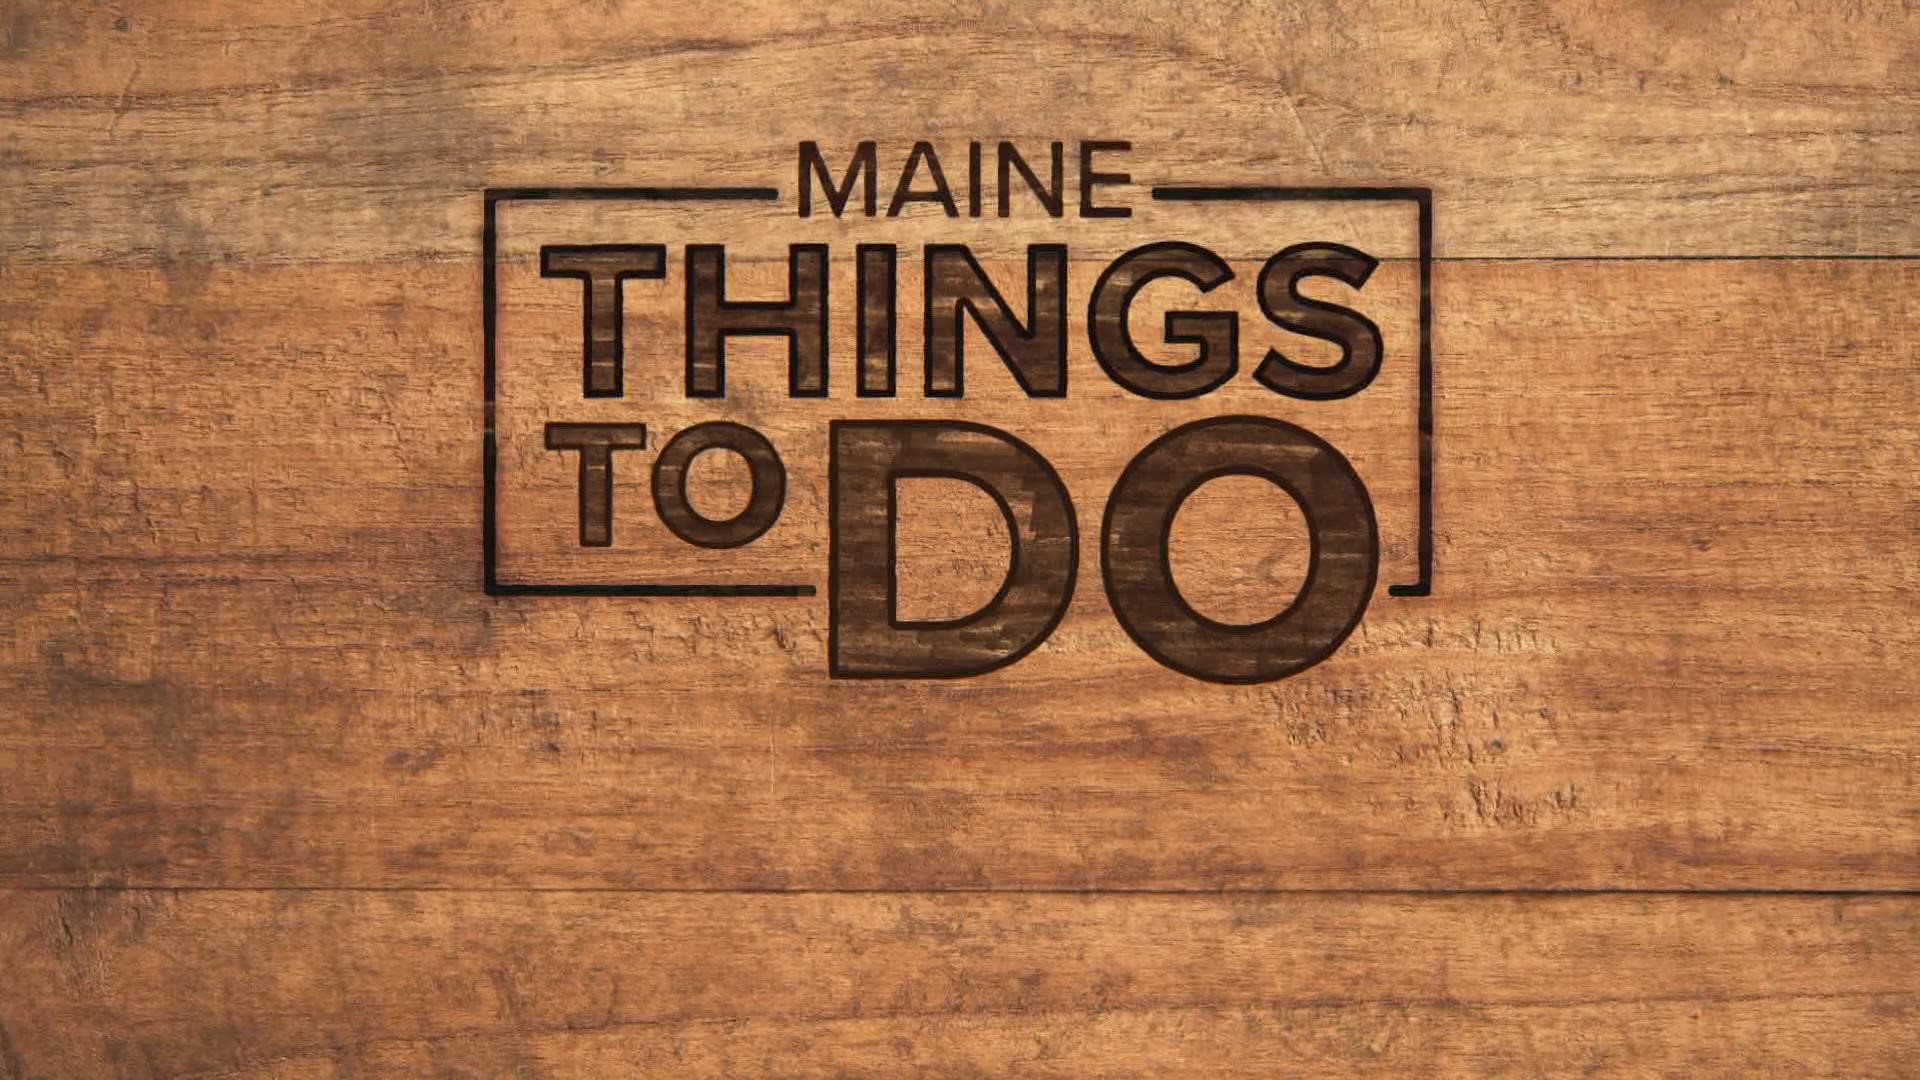 Plenty of events are scheduled around the state this week including the Maine Potato Blossom Festival and Puffin Palooza.